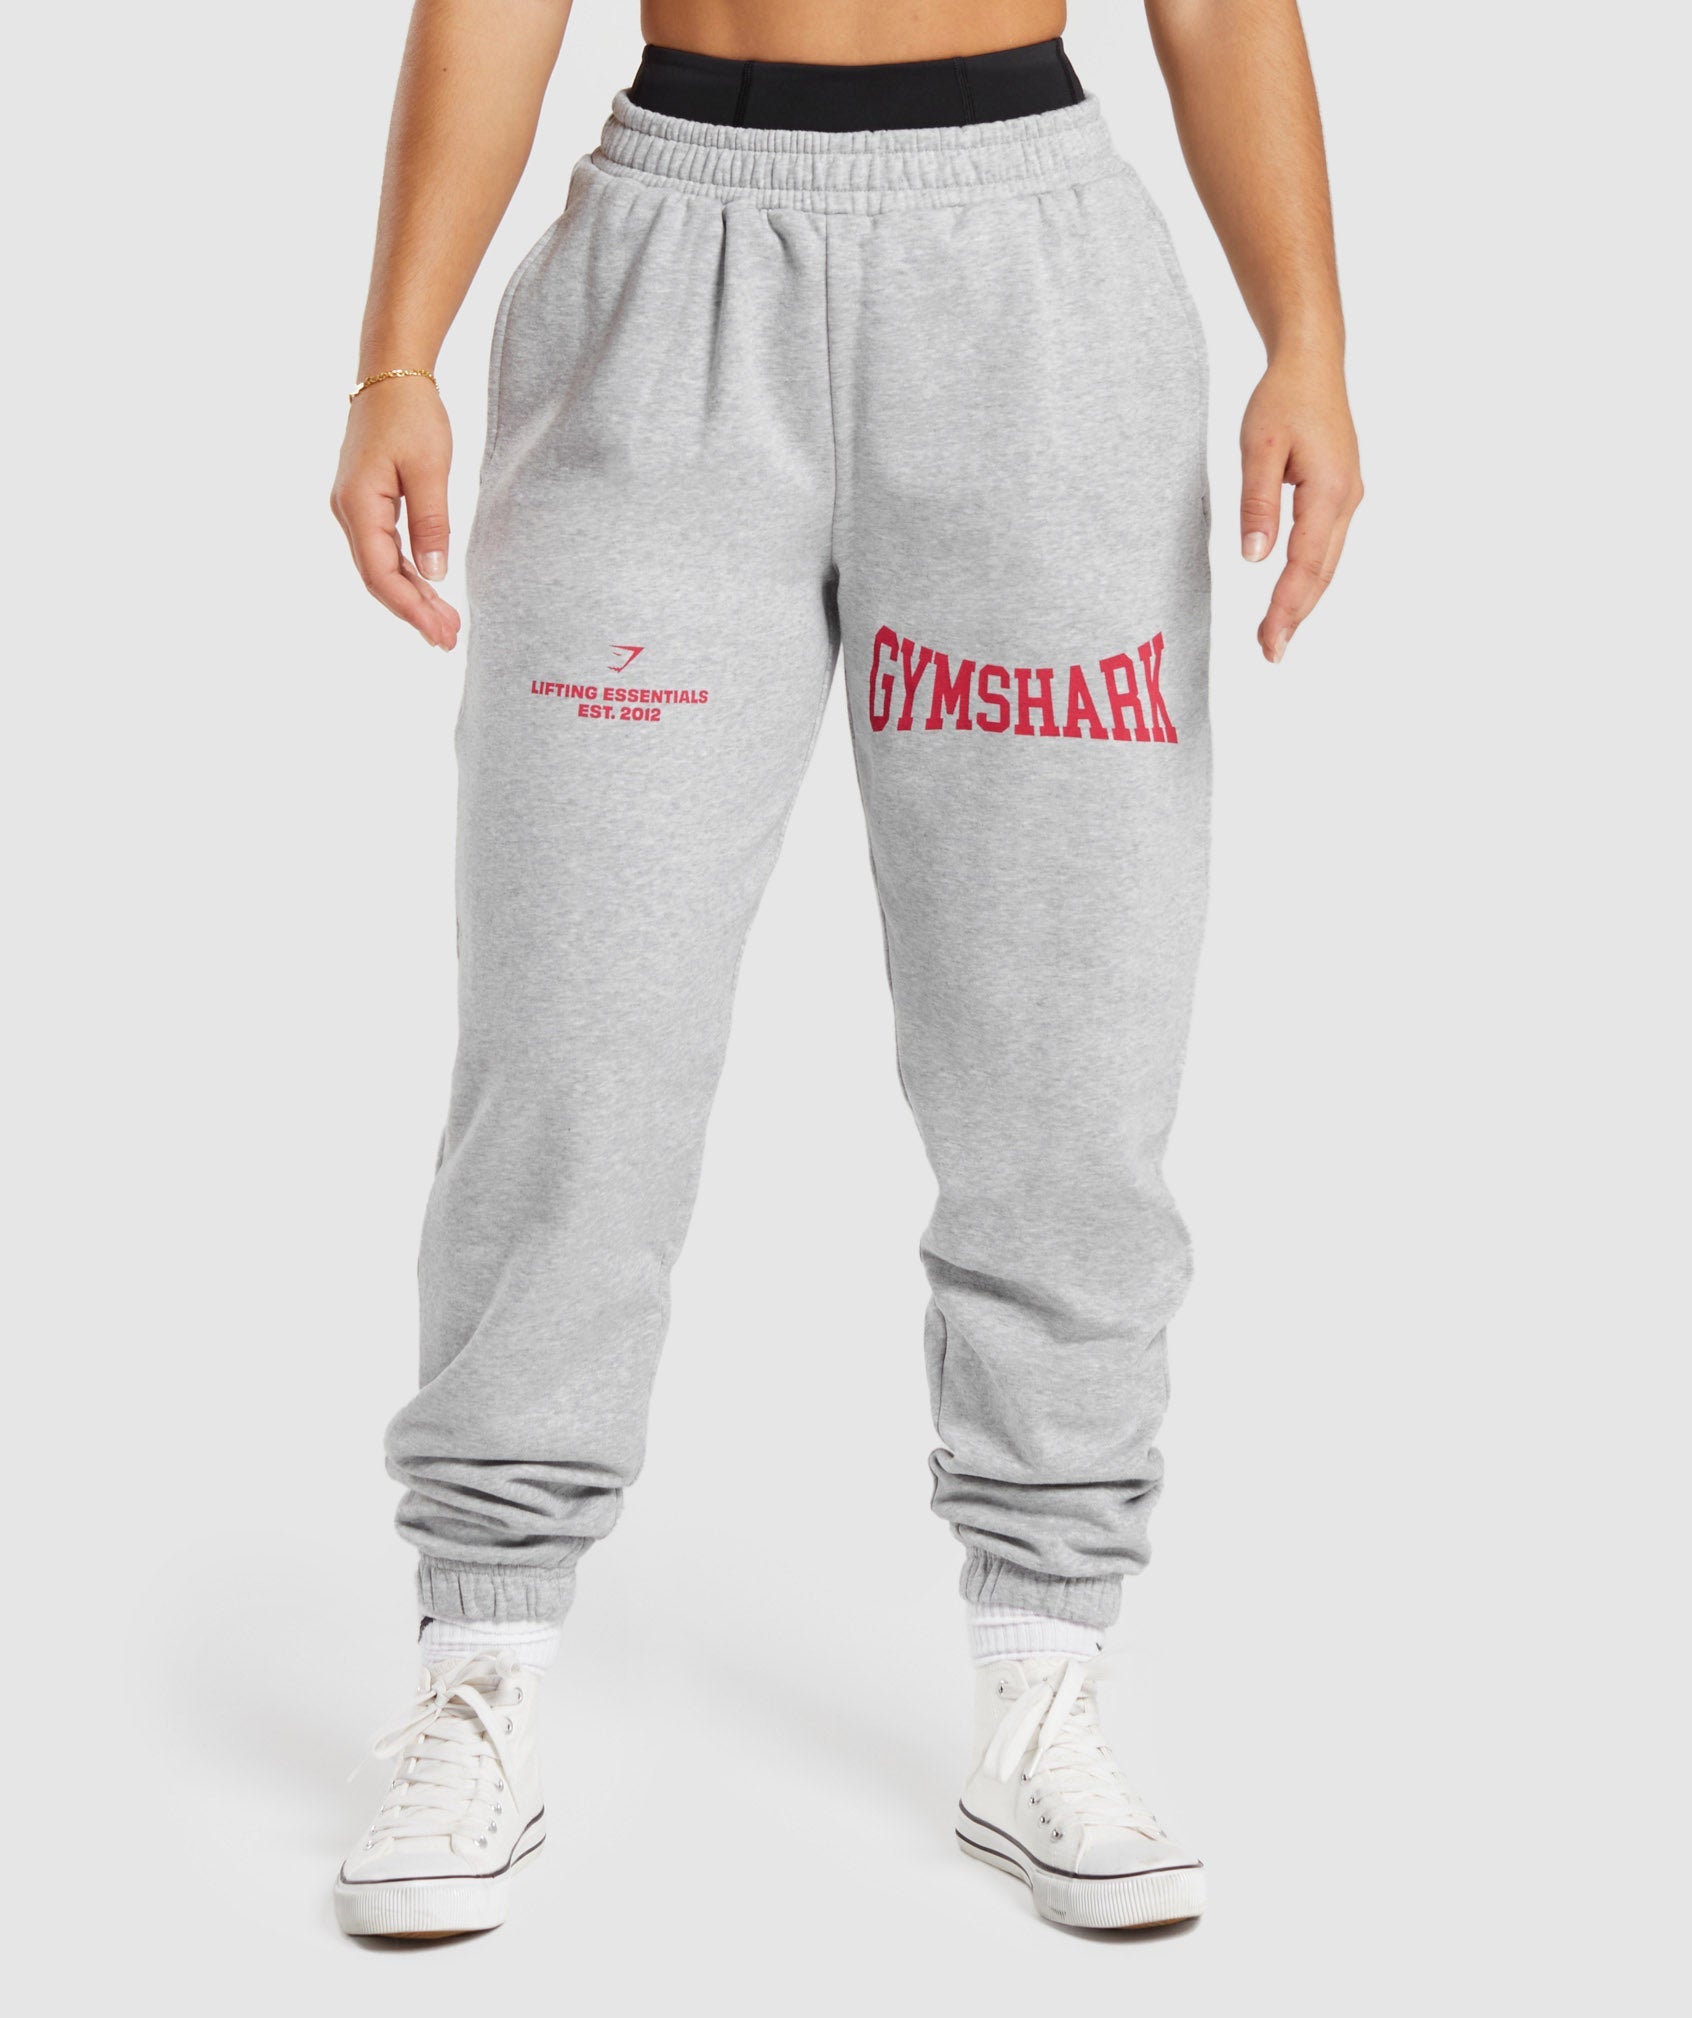 Lifting Essentials Graphic Joggers in Light Grey Core Marl